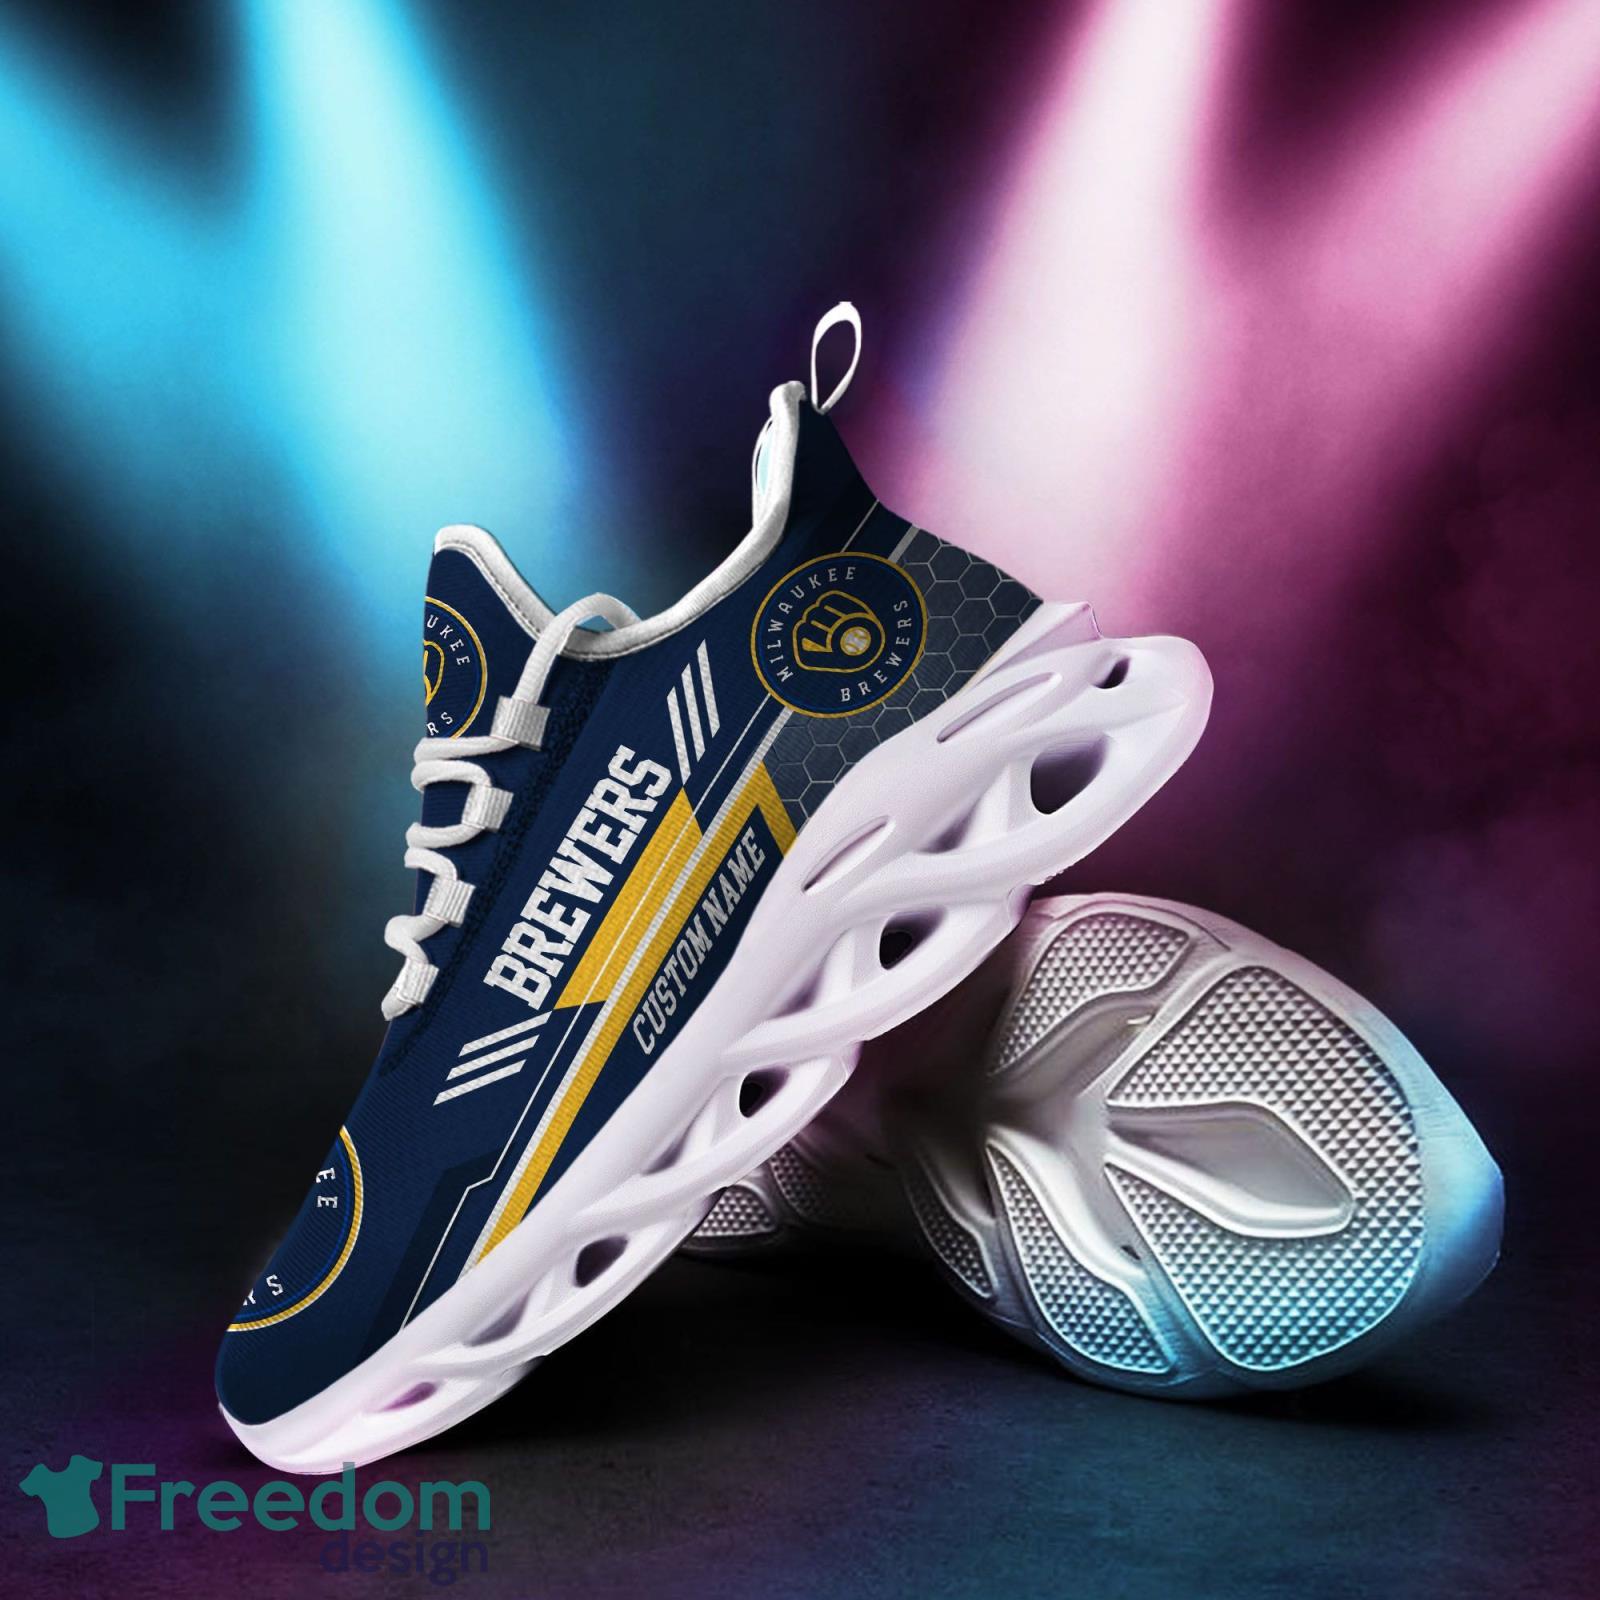 milwaukee brewers women's shoes